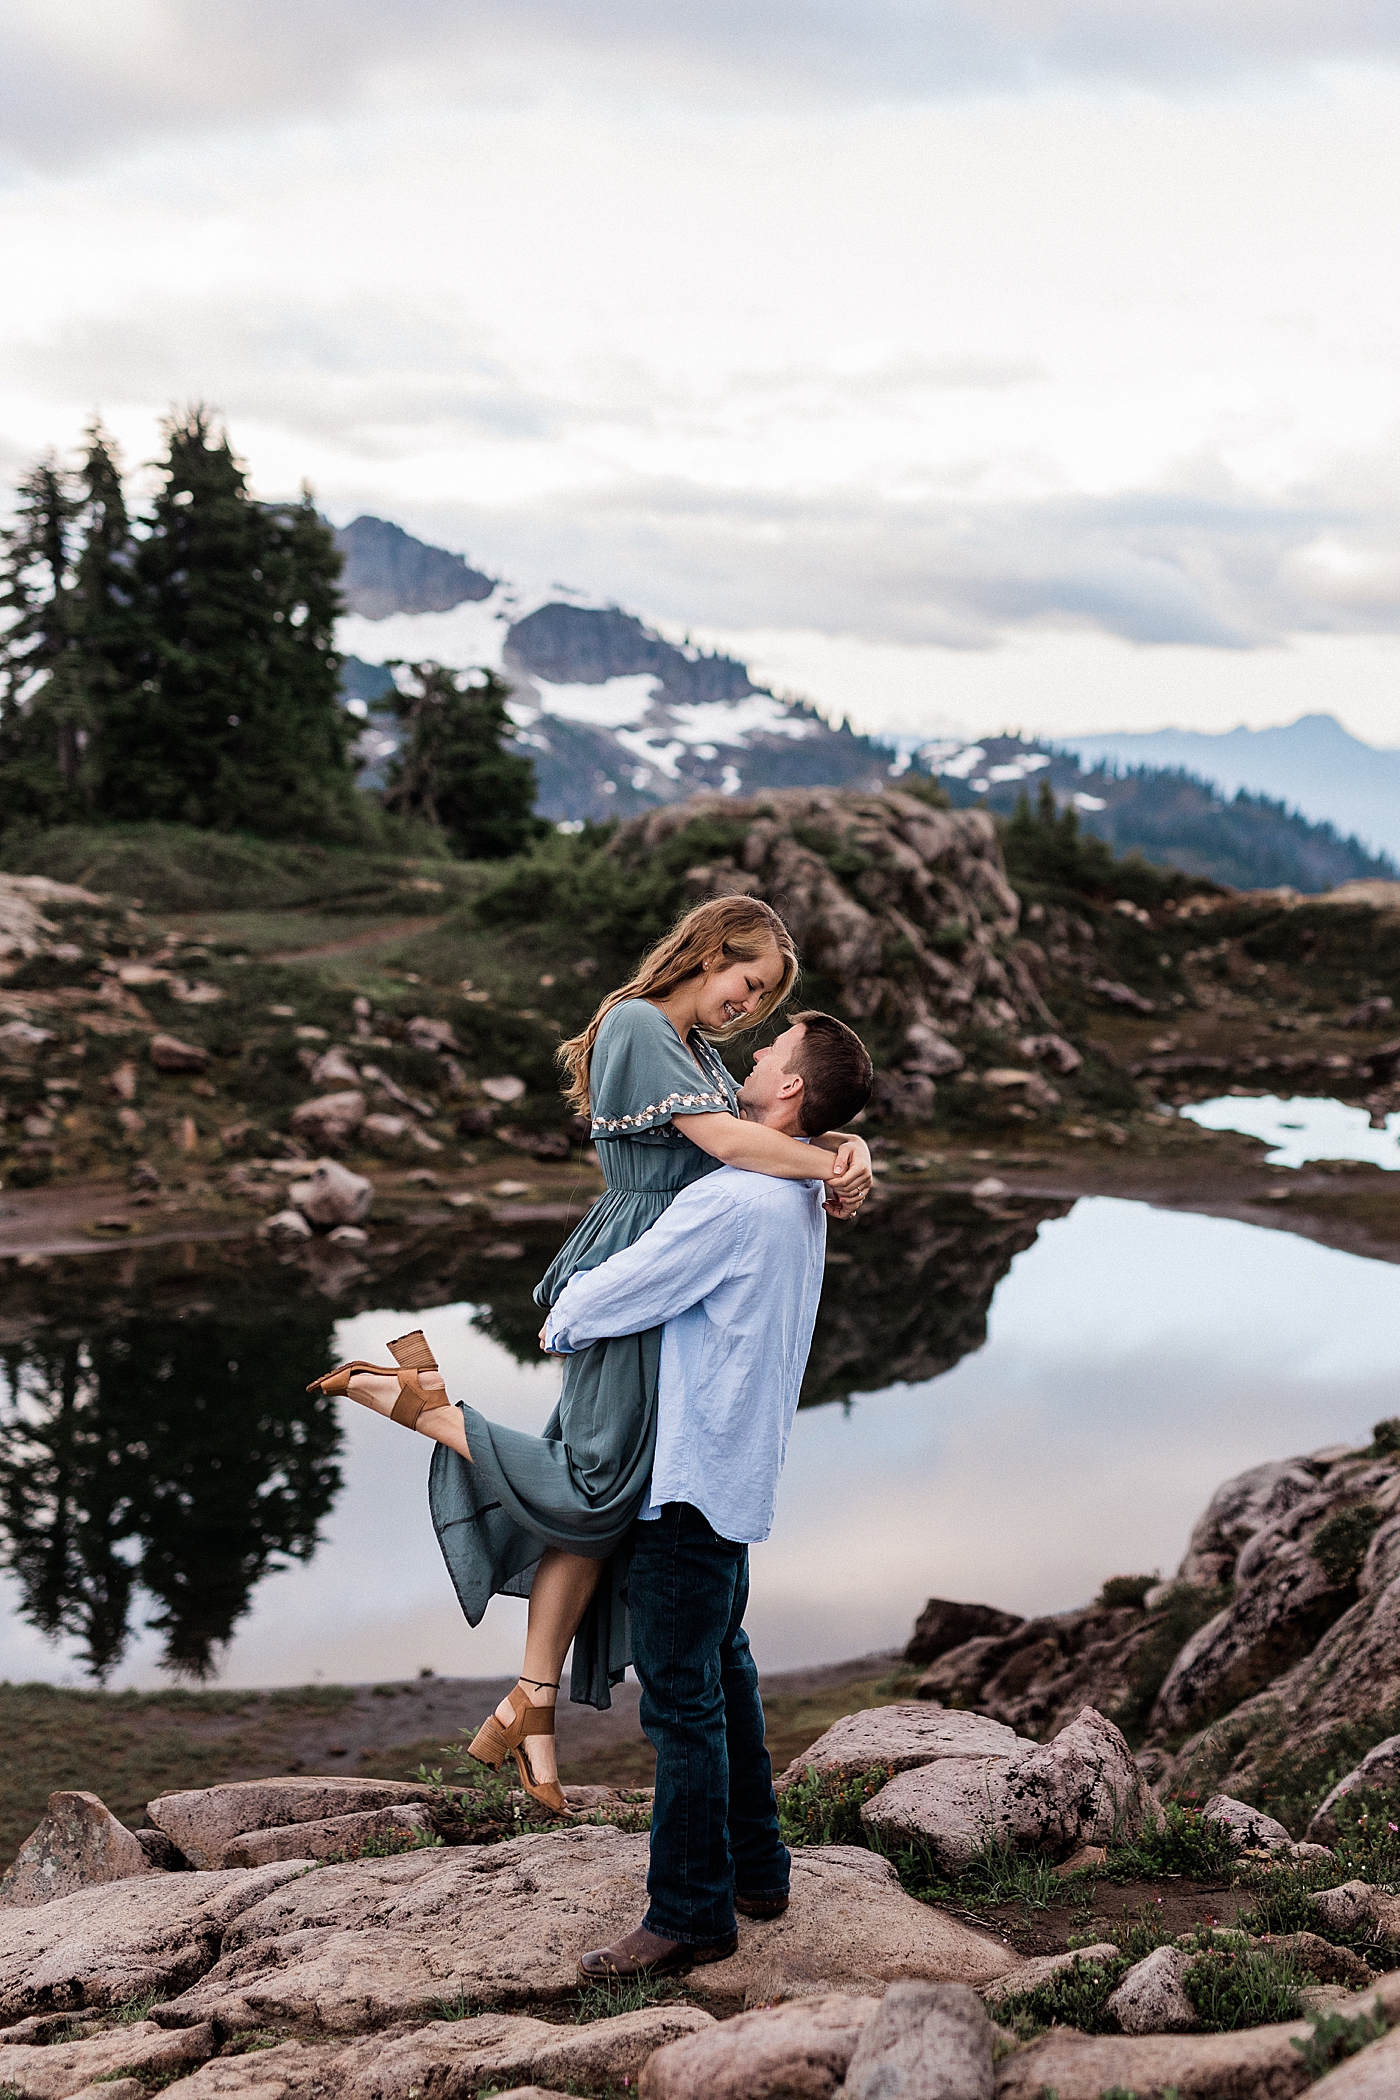 Winter engagement session at Artists Point | Megan Montalvo Photography